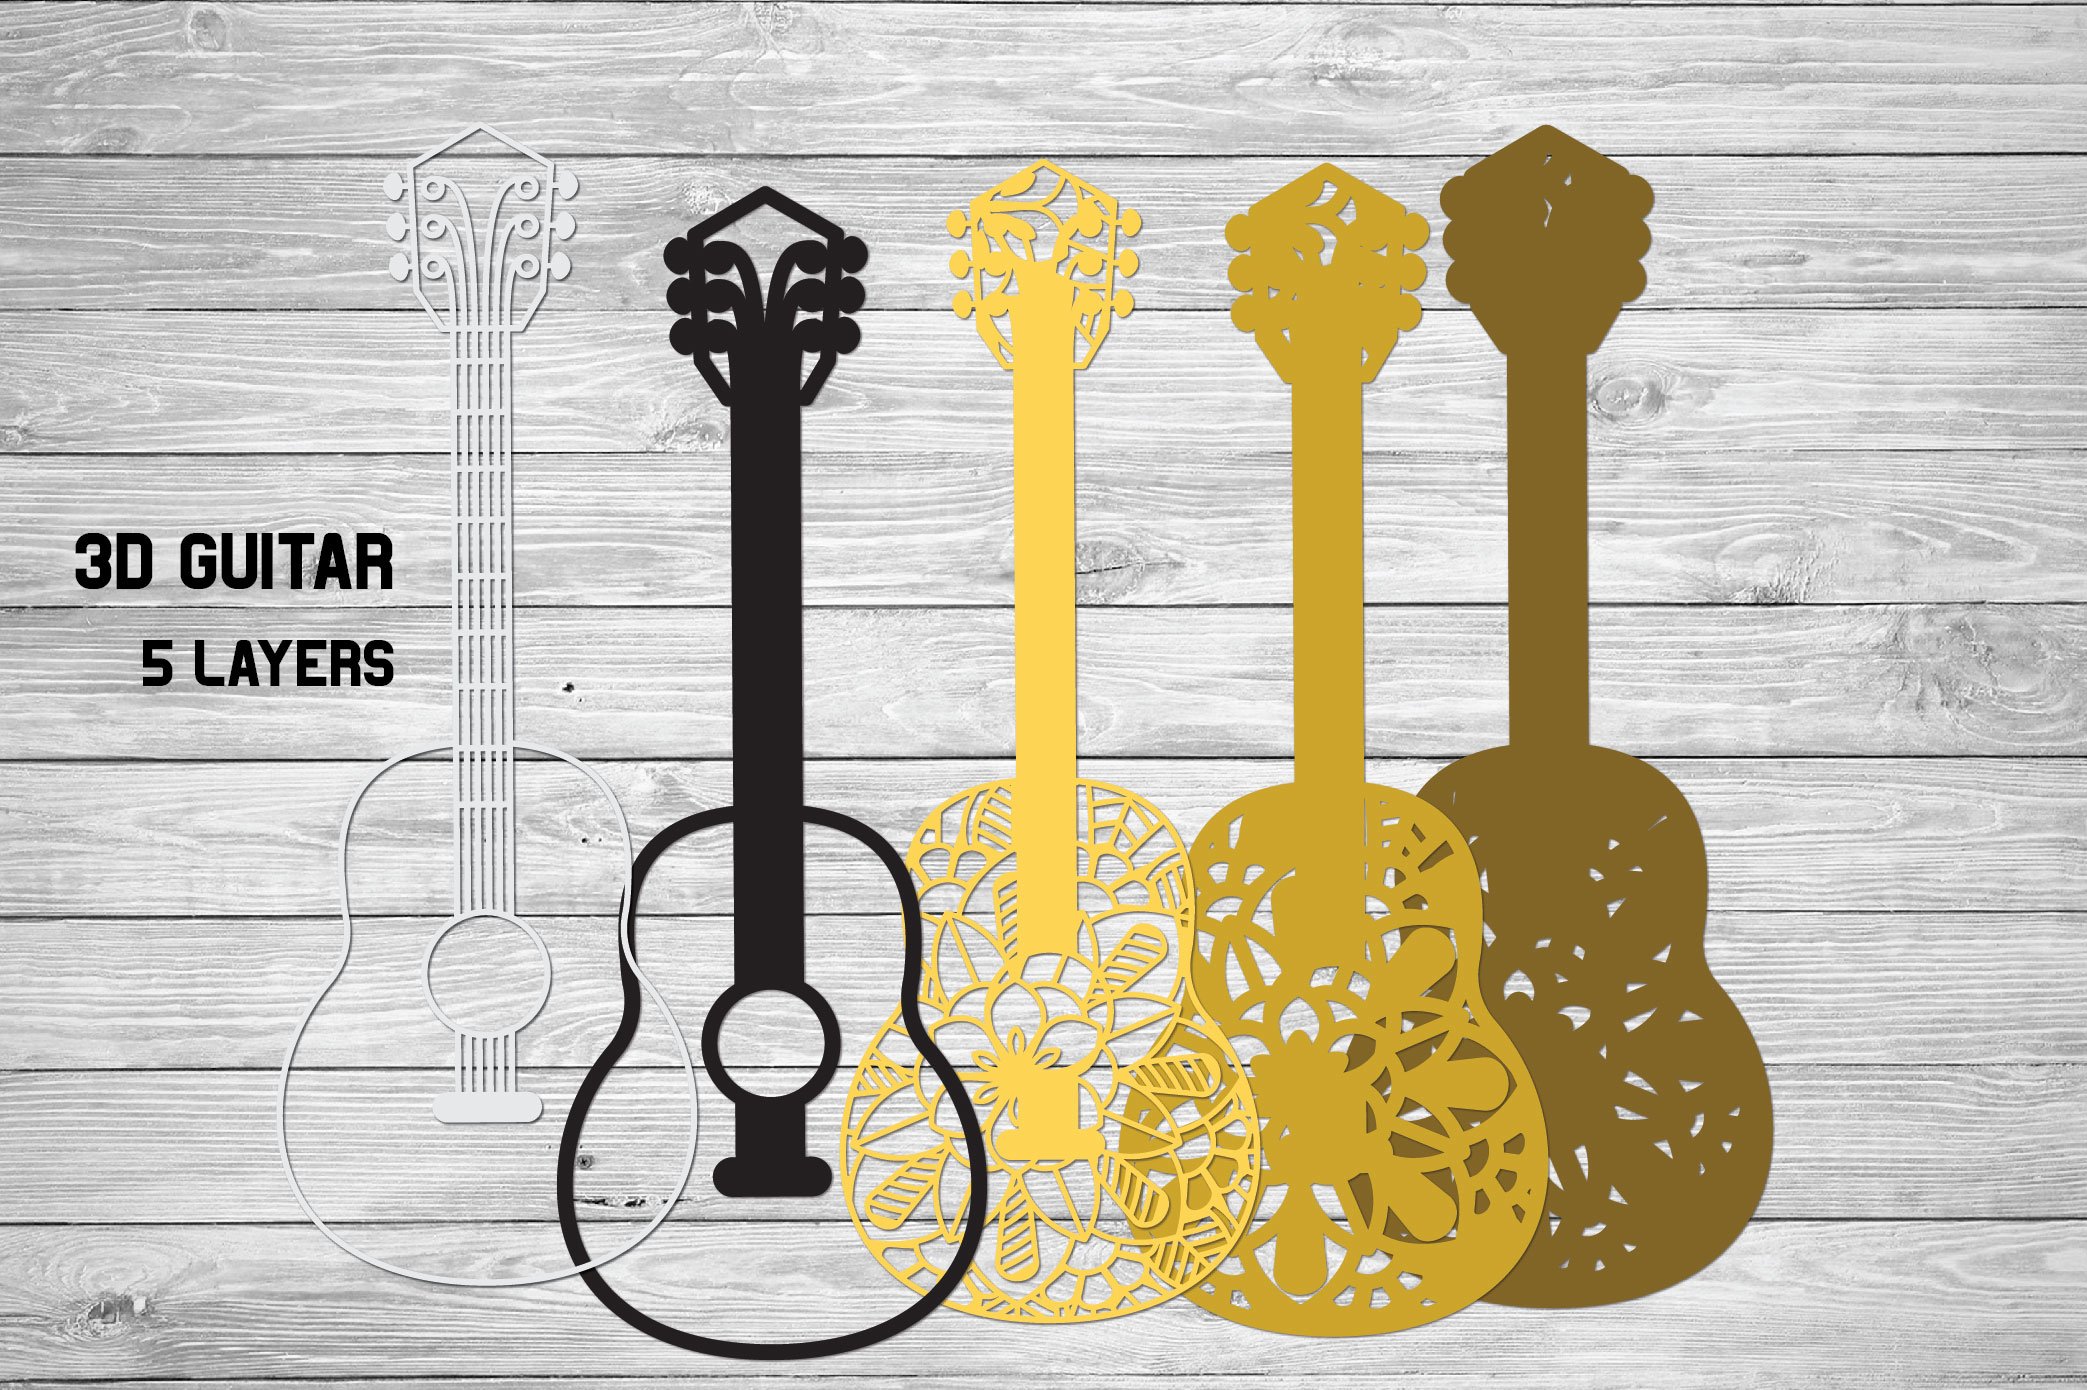 Preview of prints with guitars in different textures.